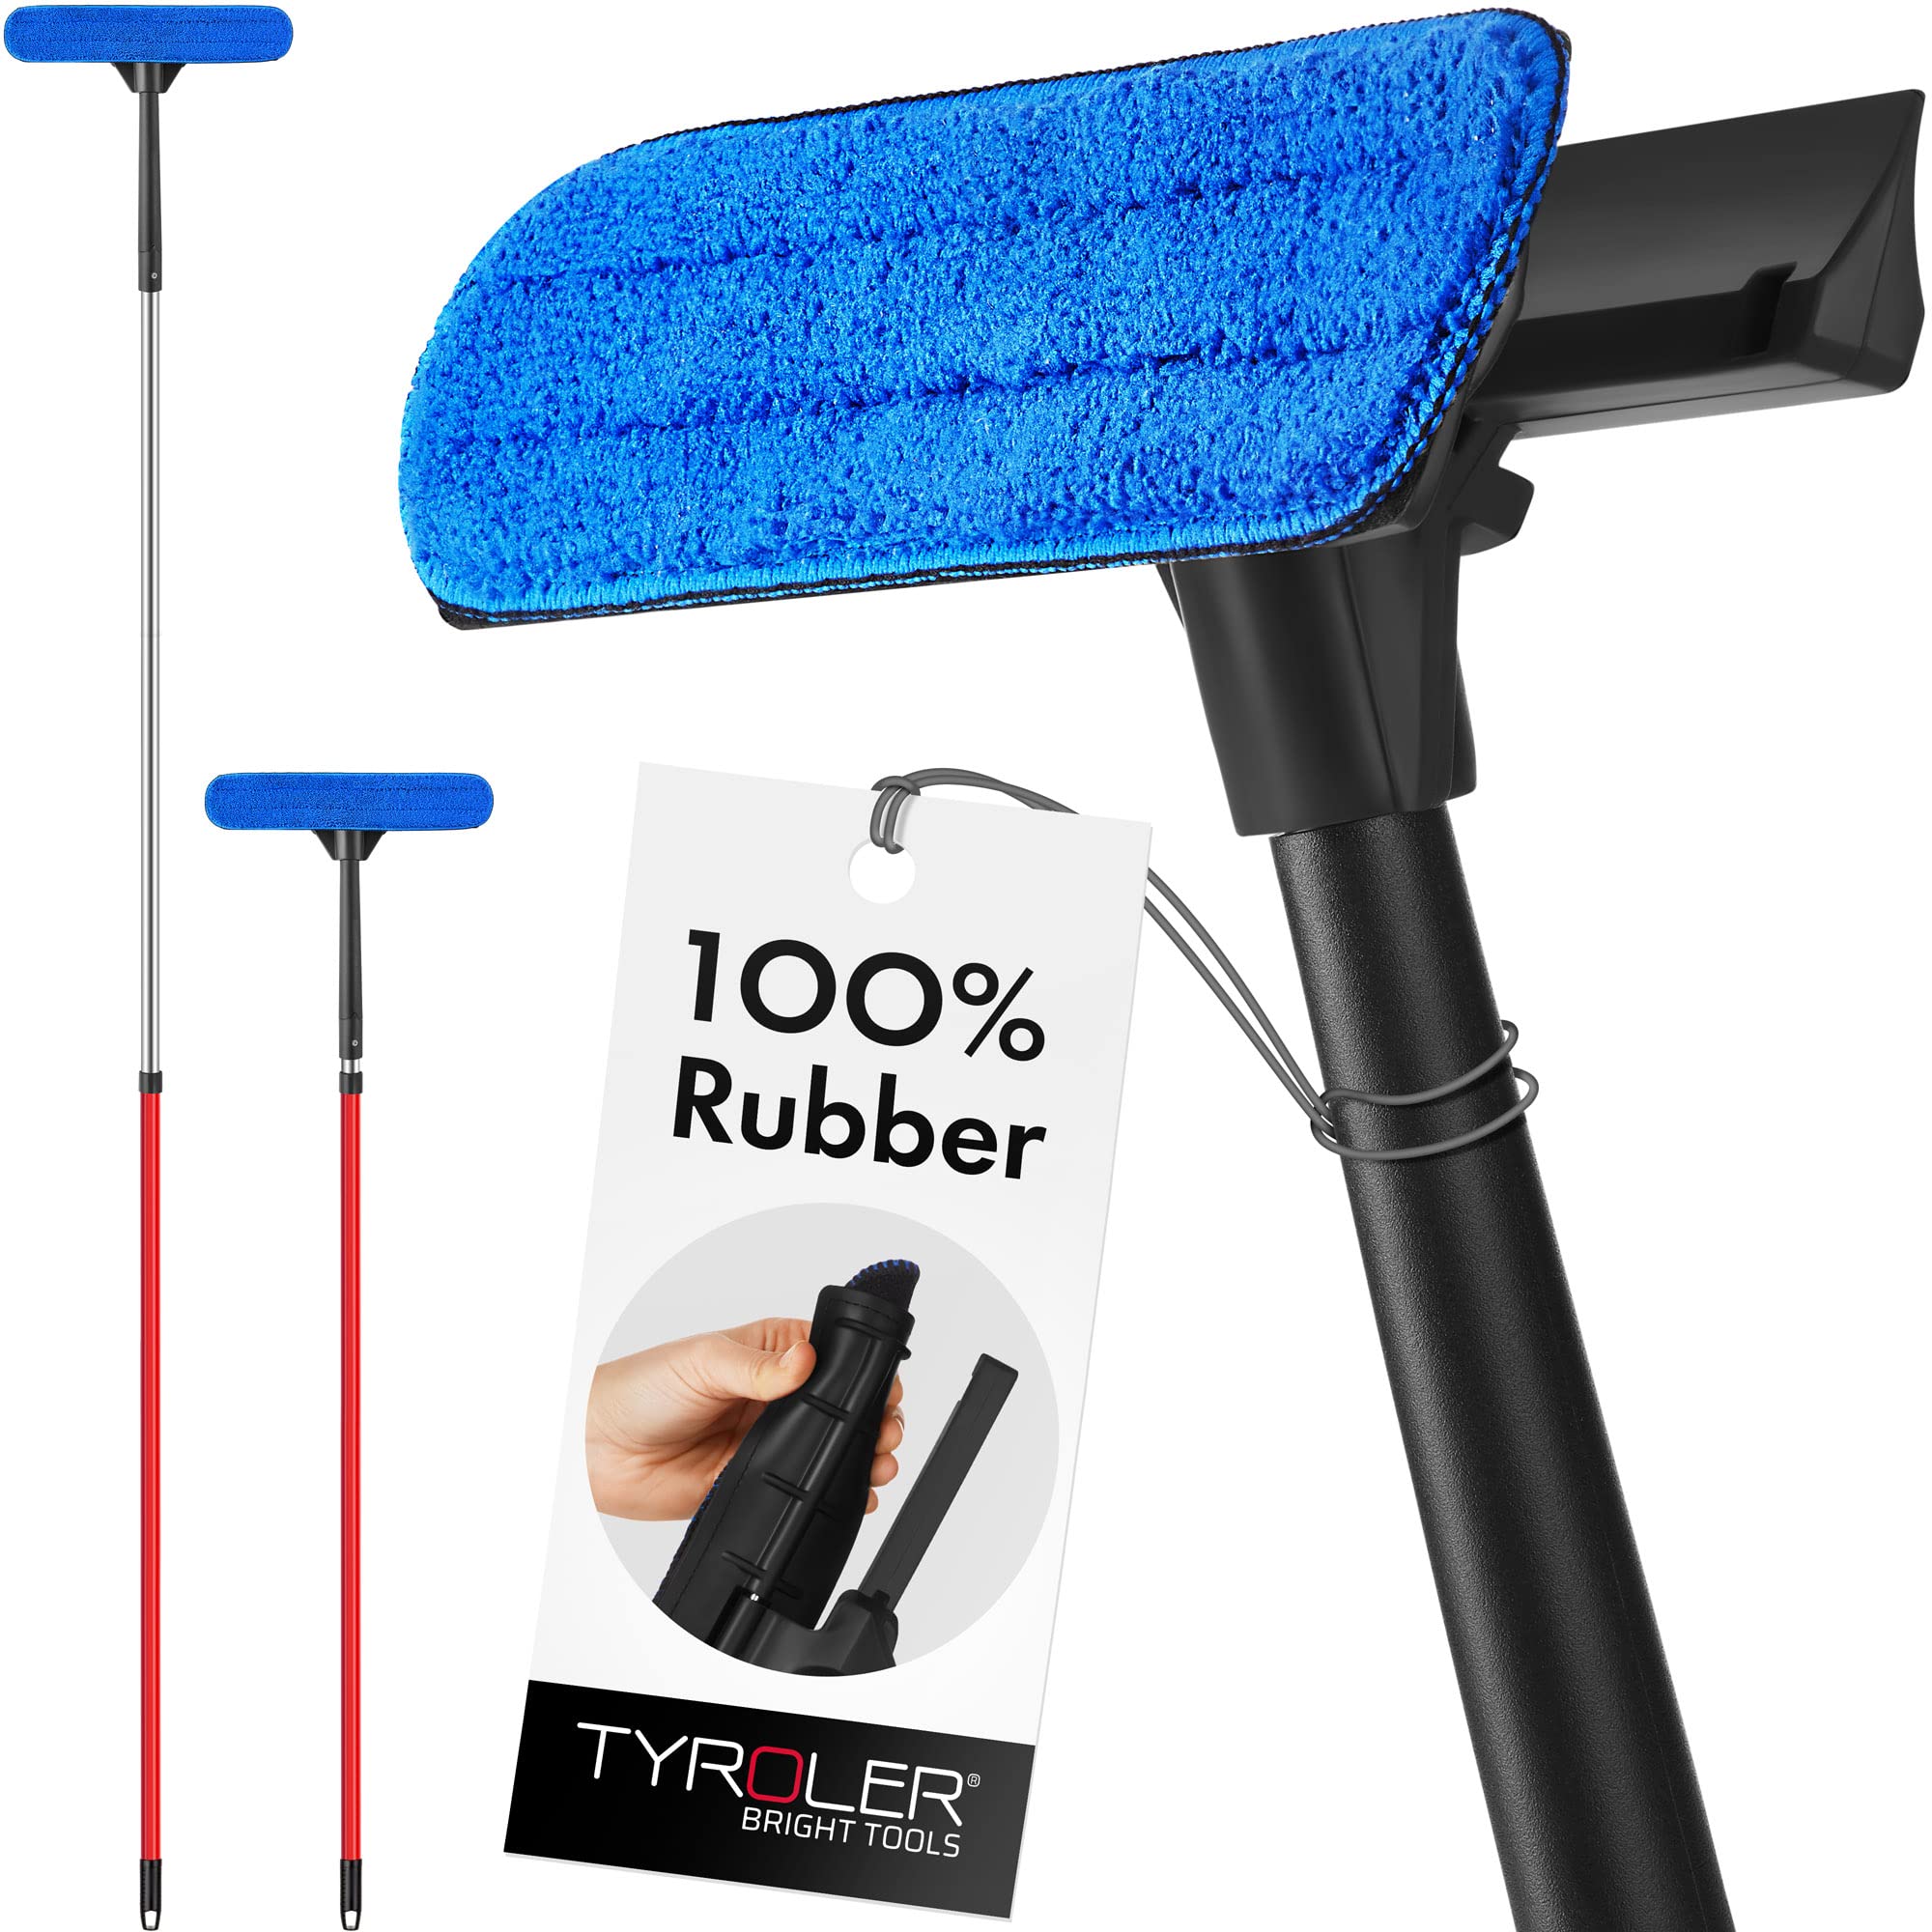 Tyroler Bright Tools Tyroler 2-In-1 High Window Cleaner Tool With 4.5 To 7.5 Ft Extendable Handle  Made Of 100% Natural Rubber For Superior D